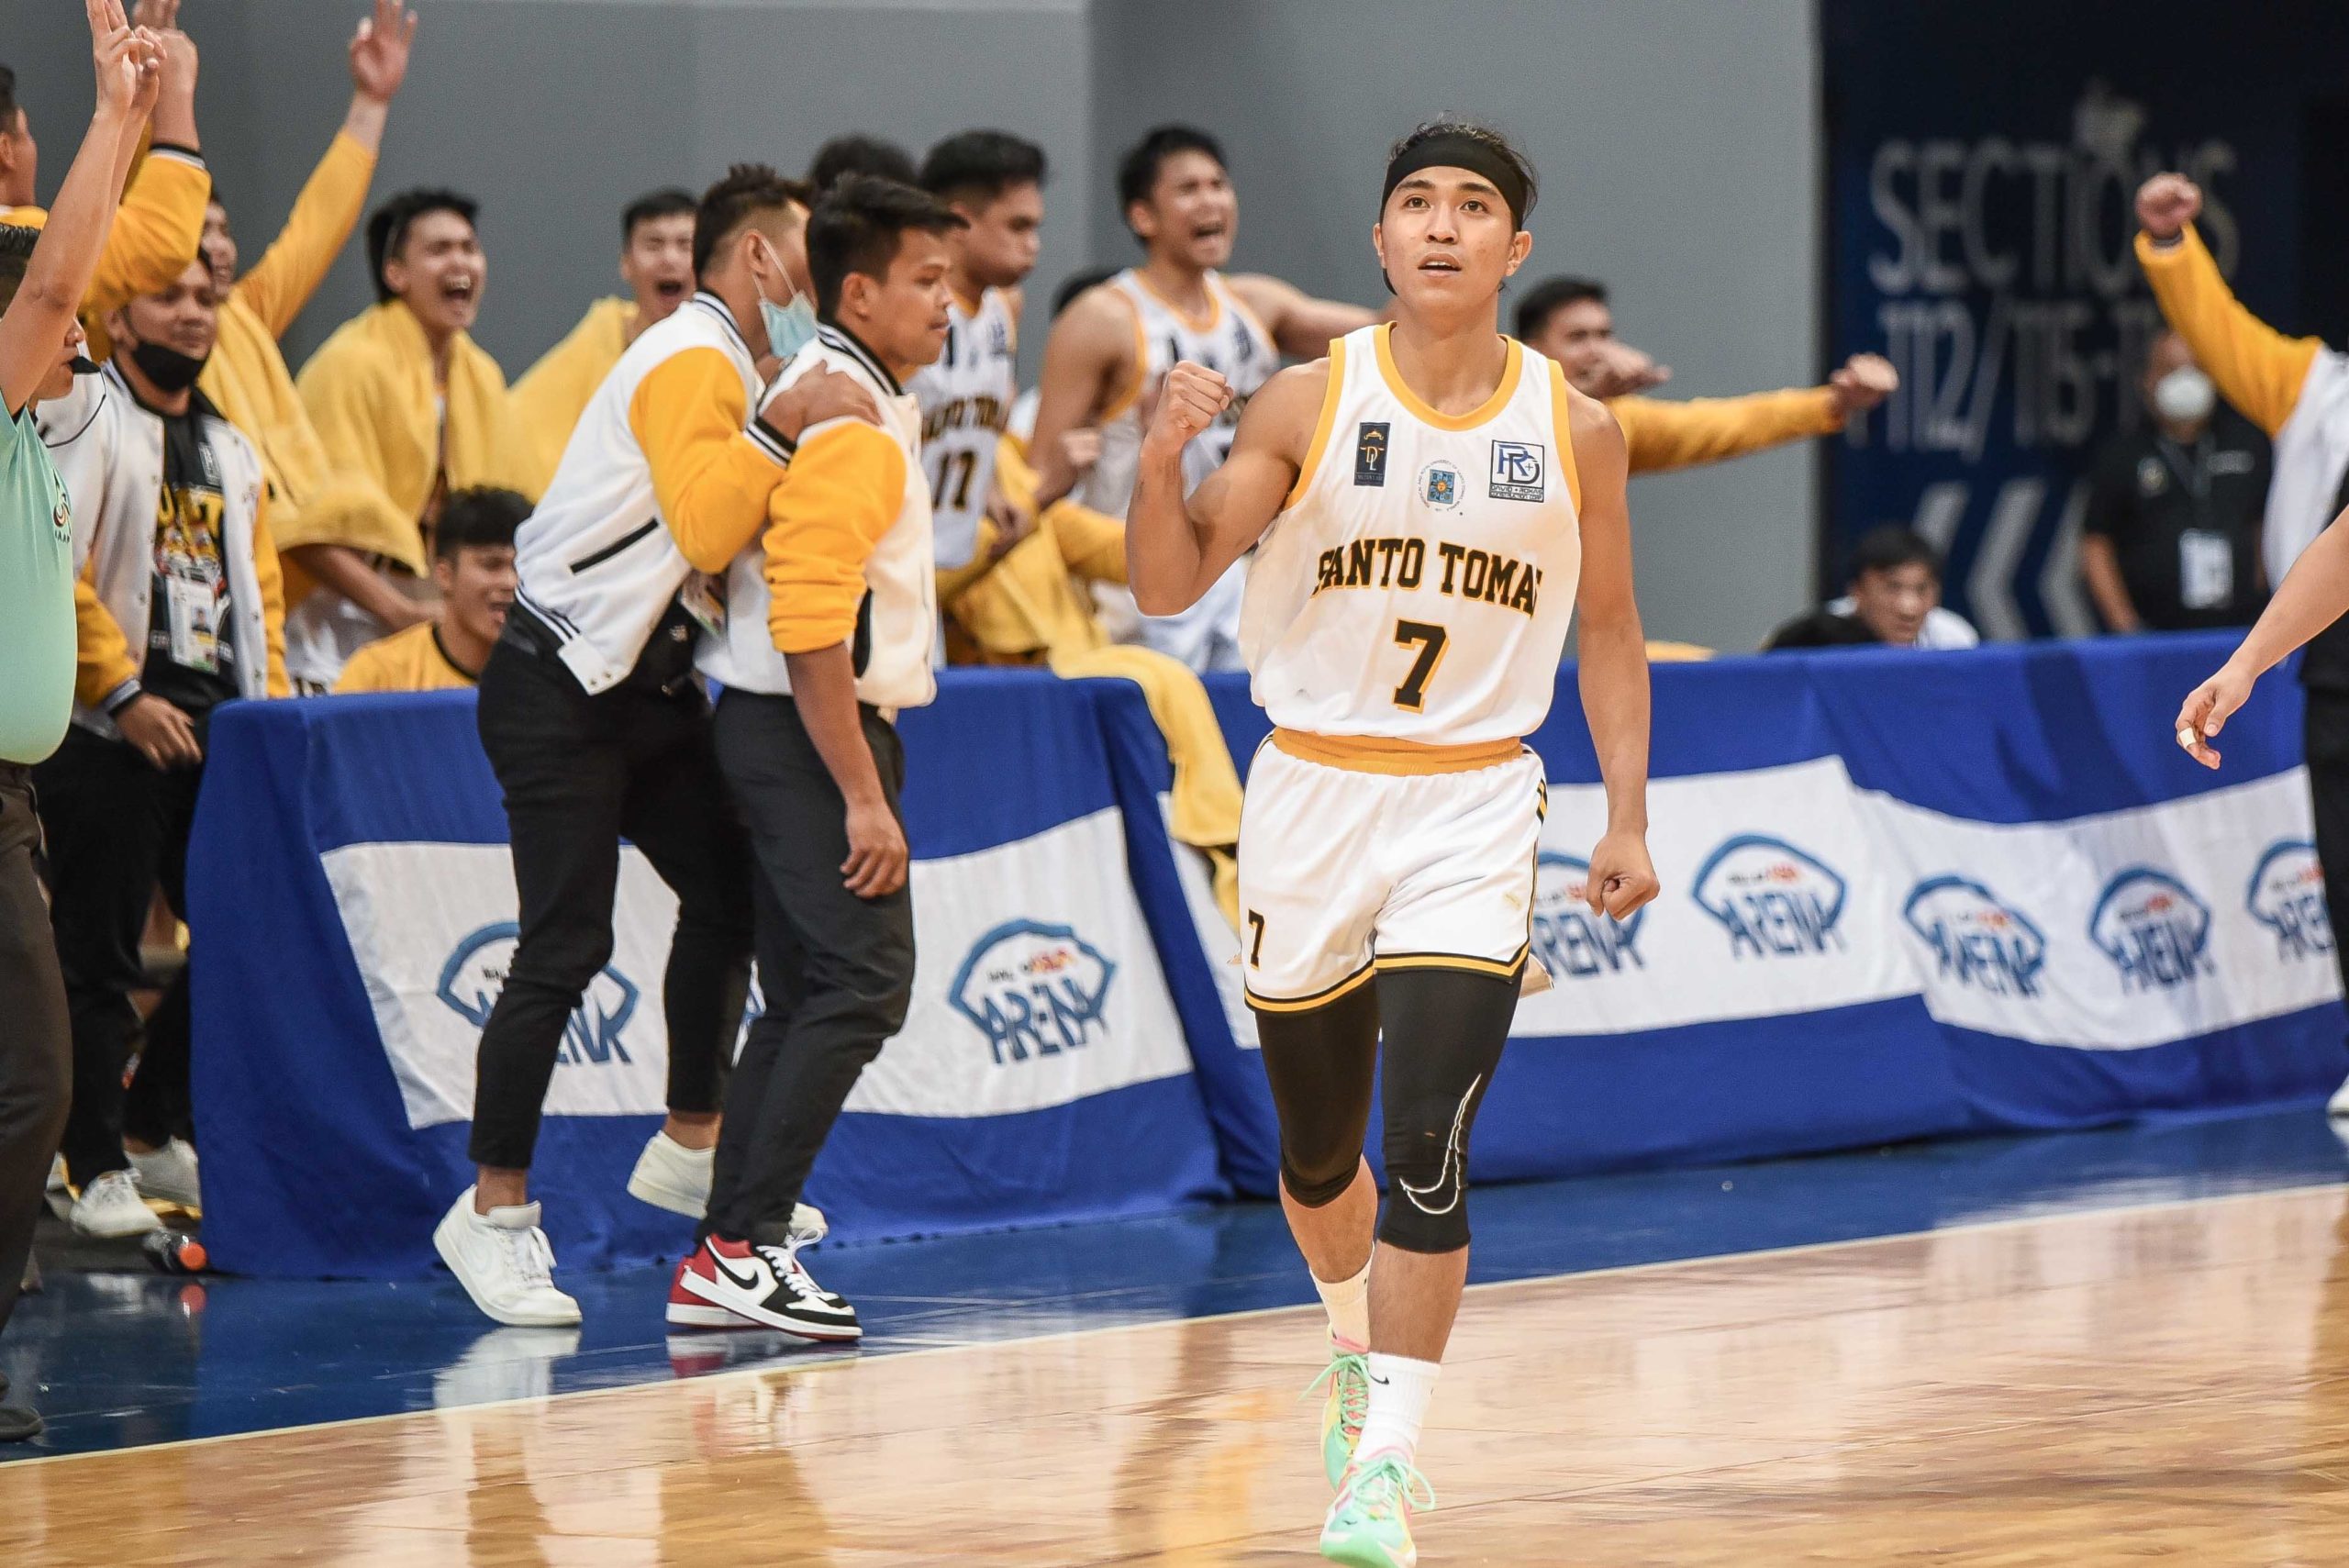 Joshua Fontanilla comes up with clutch hits for UST. —Photo courtesy of UAAP MEDIA